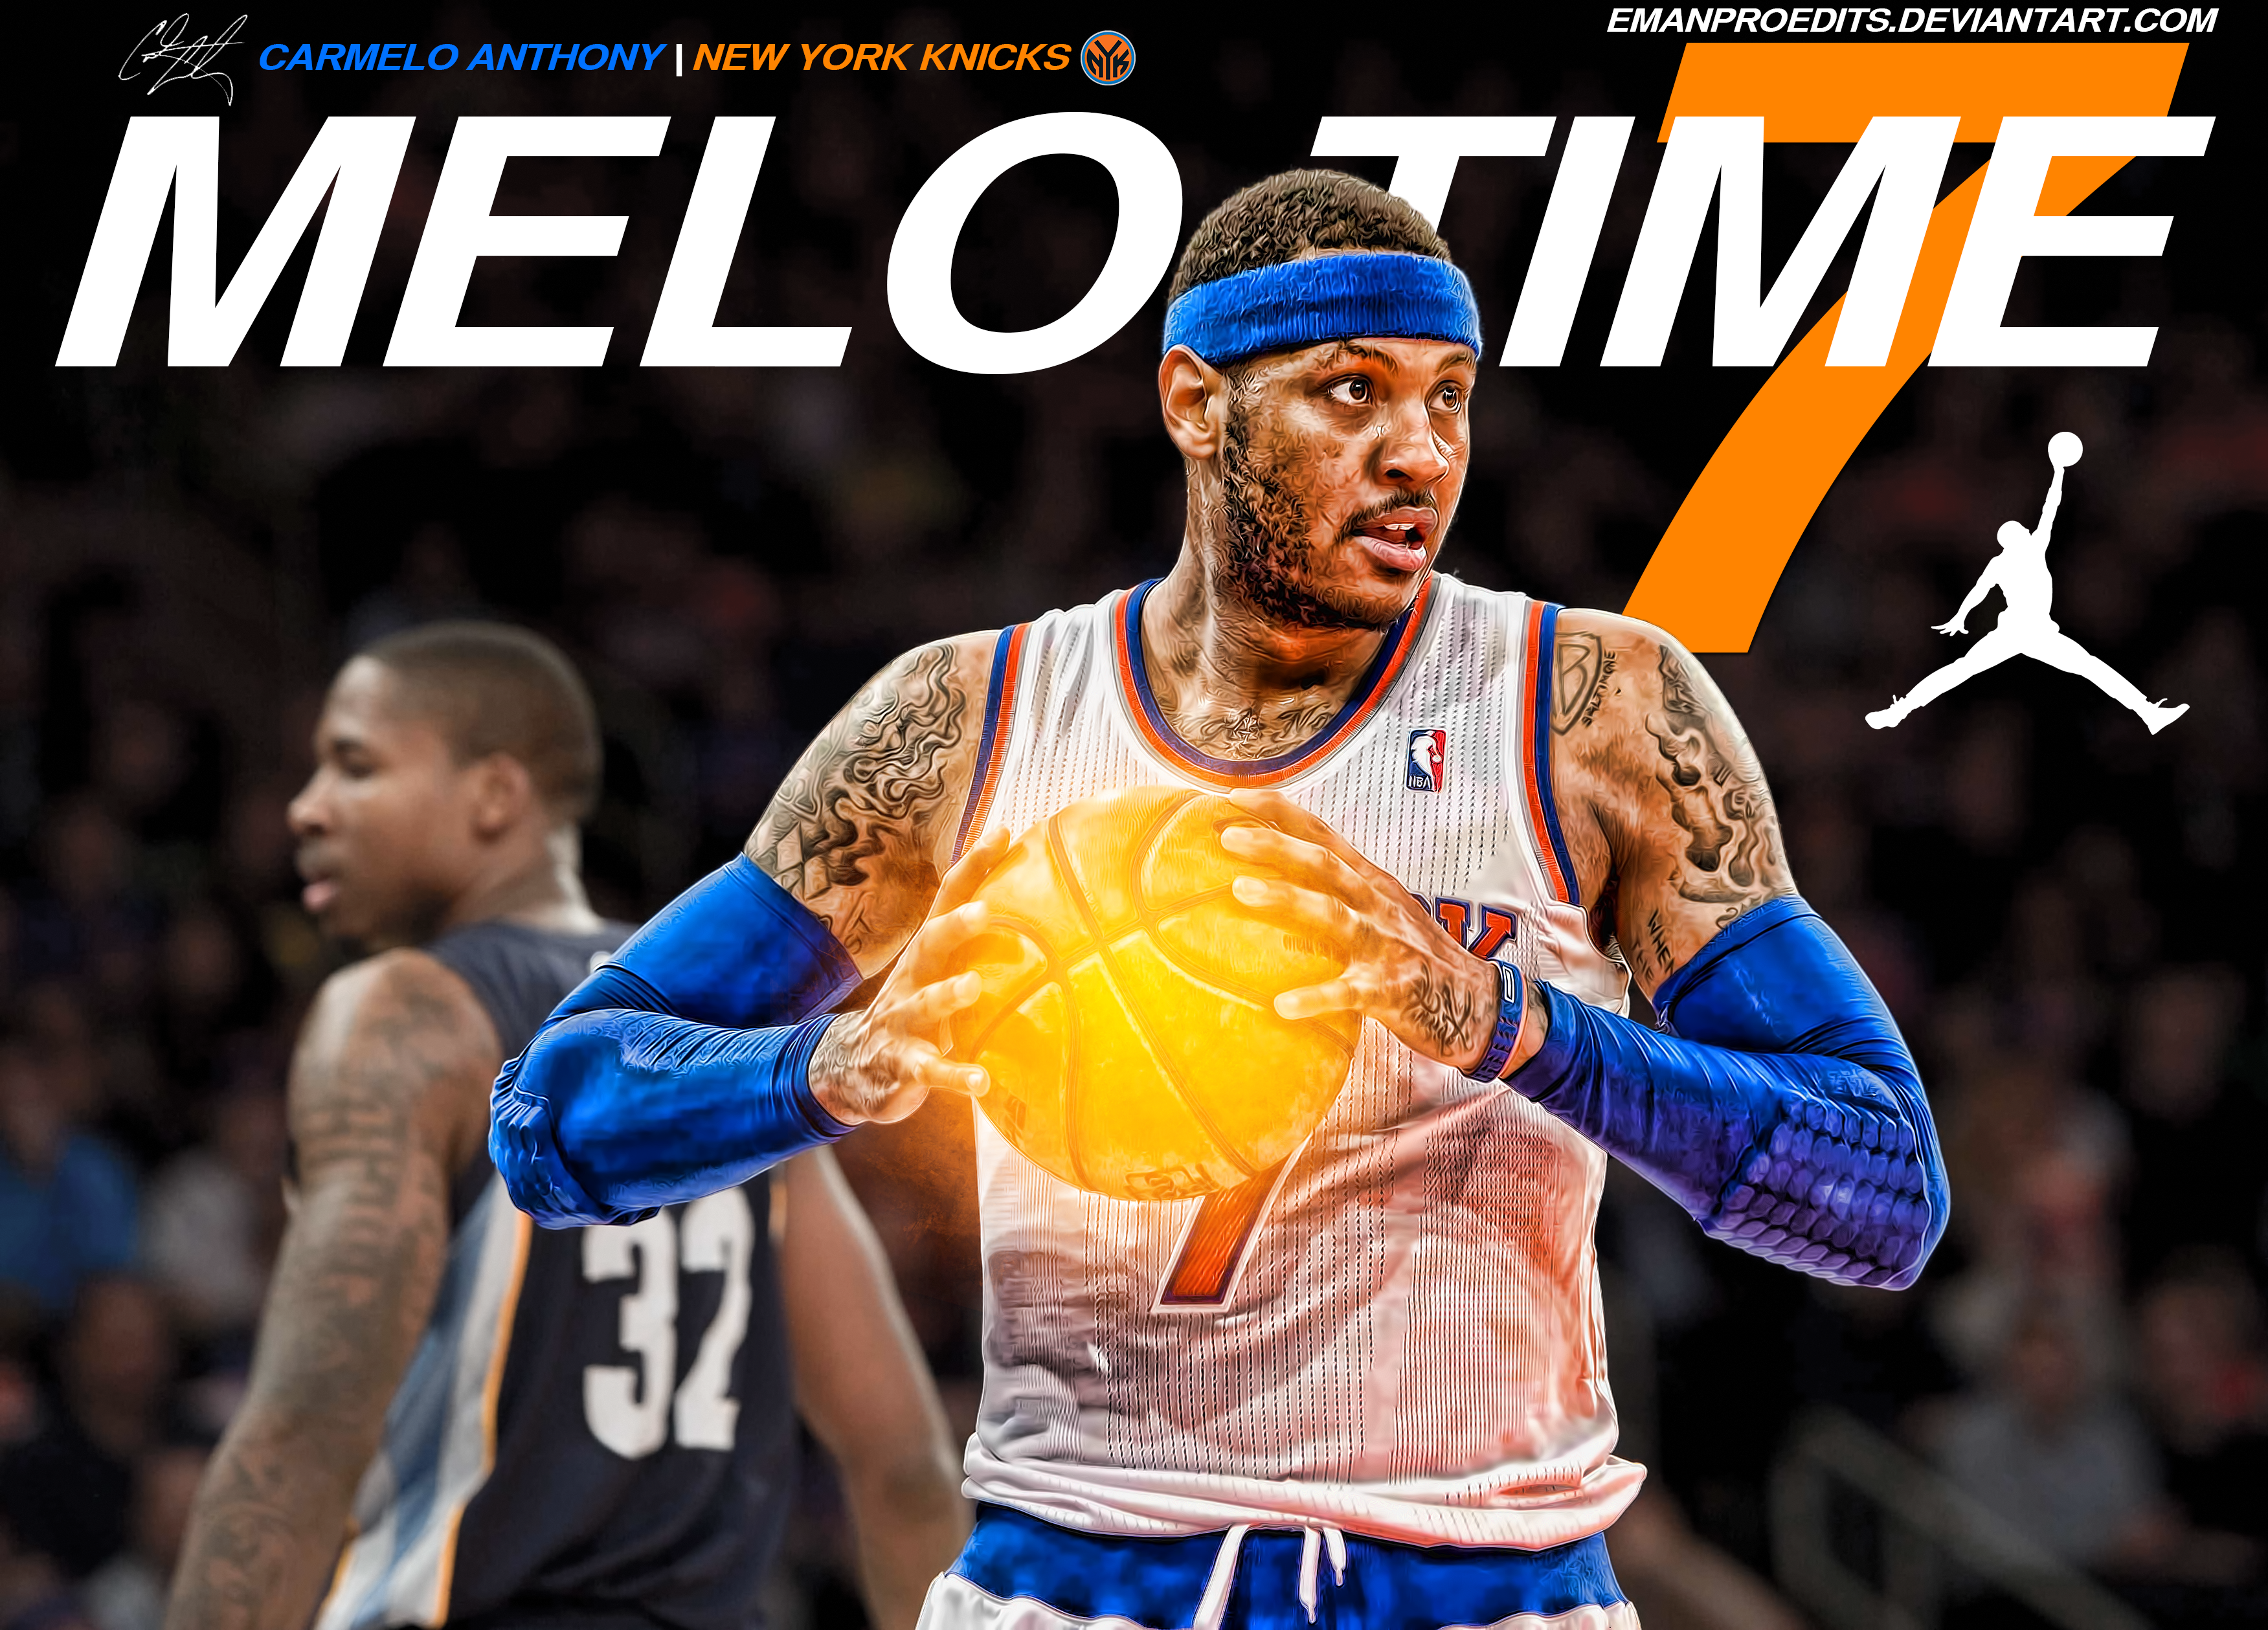 Carmelo Anthony Wallpaper by emanproedits on